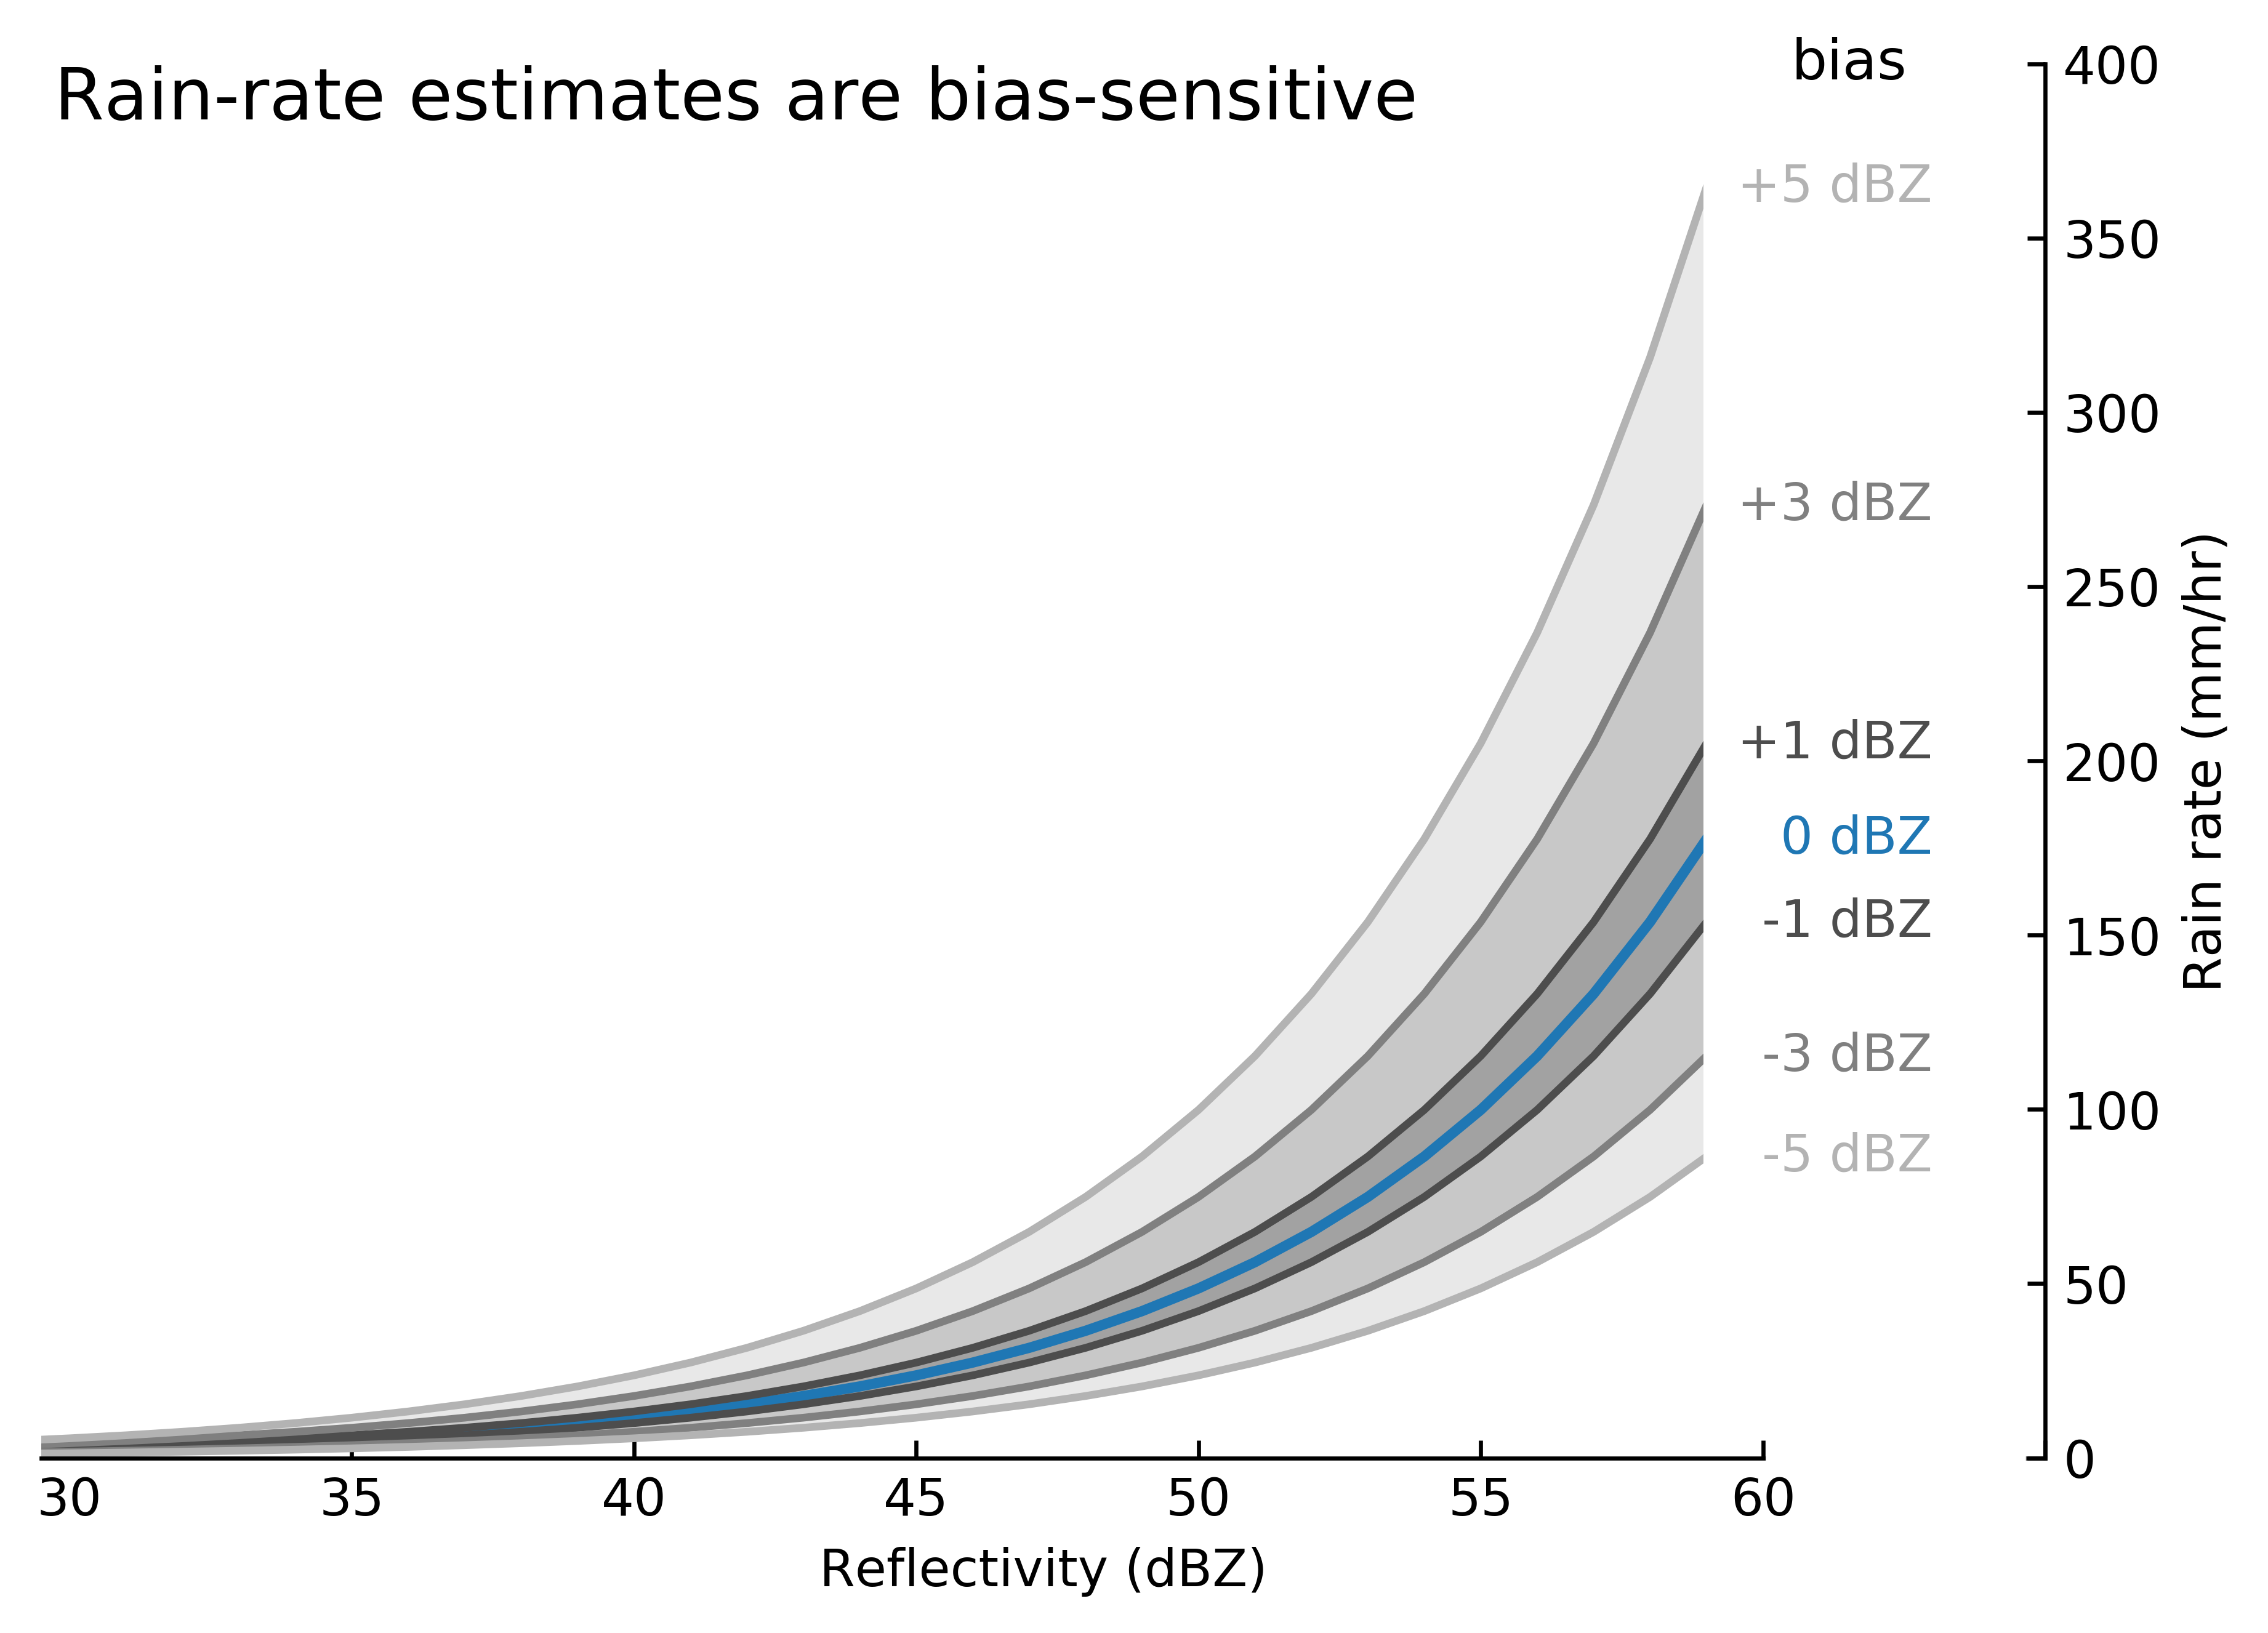 Reflectivity vs rain-rate estimates for different calibration biases. The base Z--R relationship (in blue) shows the standard Marshall-Palmer Z--R relationship ($Z=200R^{1.6}$). Z--R scenarios for different degrees of calibration biases are shown in dark gray ($\pm$ 1 dBZ), medium gray ($\pm$ 3 dBZ), and light gray ($\pm$ 5 dbZ).